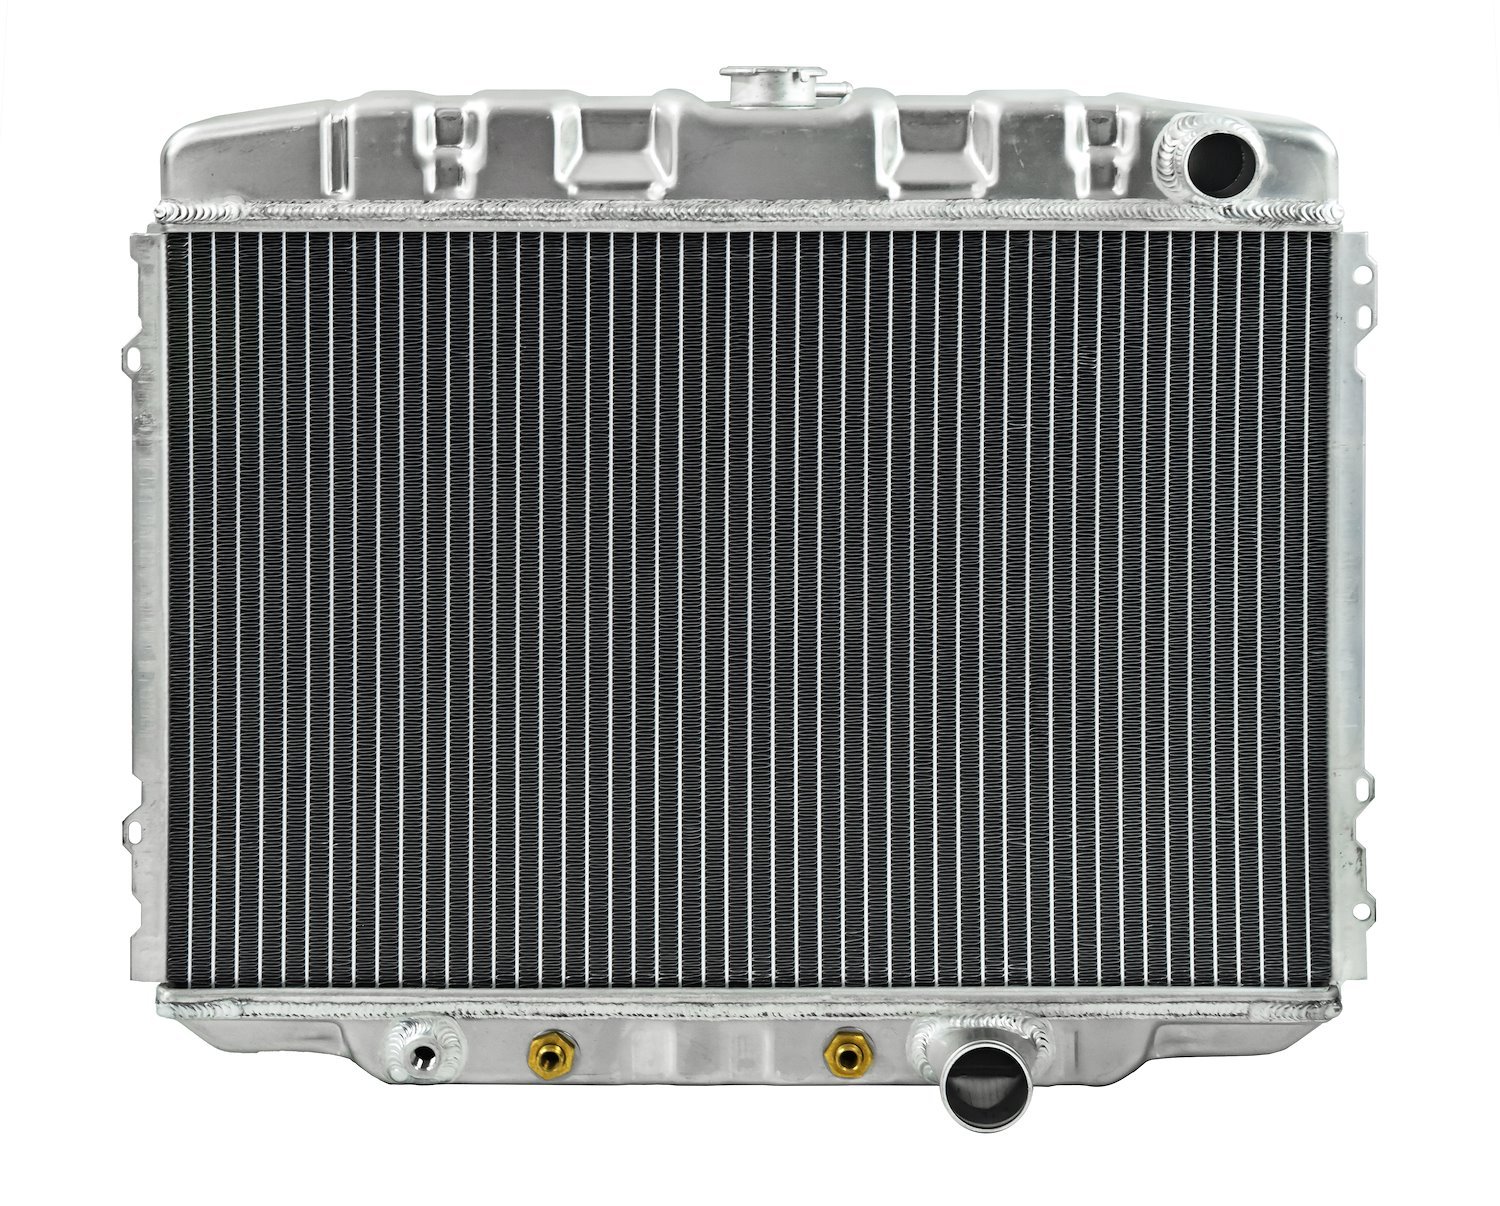 Reproduction Aluminum Radiator for 1967-1970 Ford Mustang w/ Small Block [With Air Conditioning]